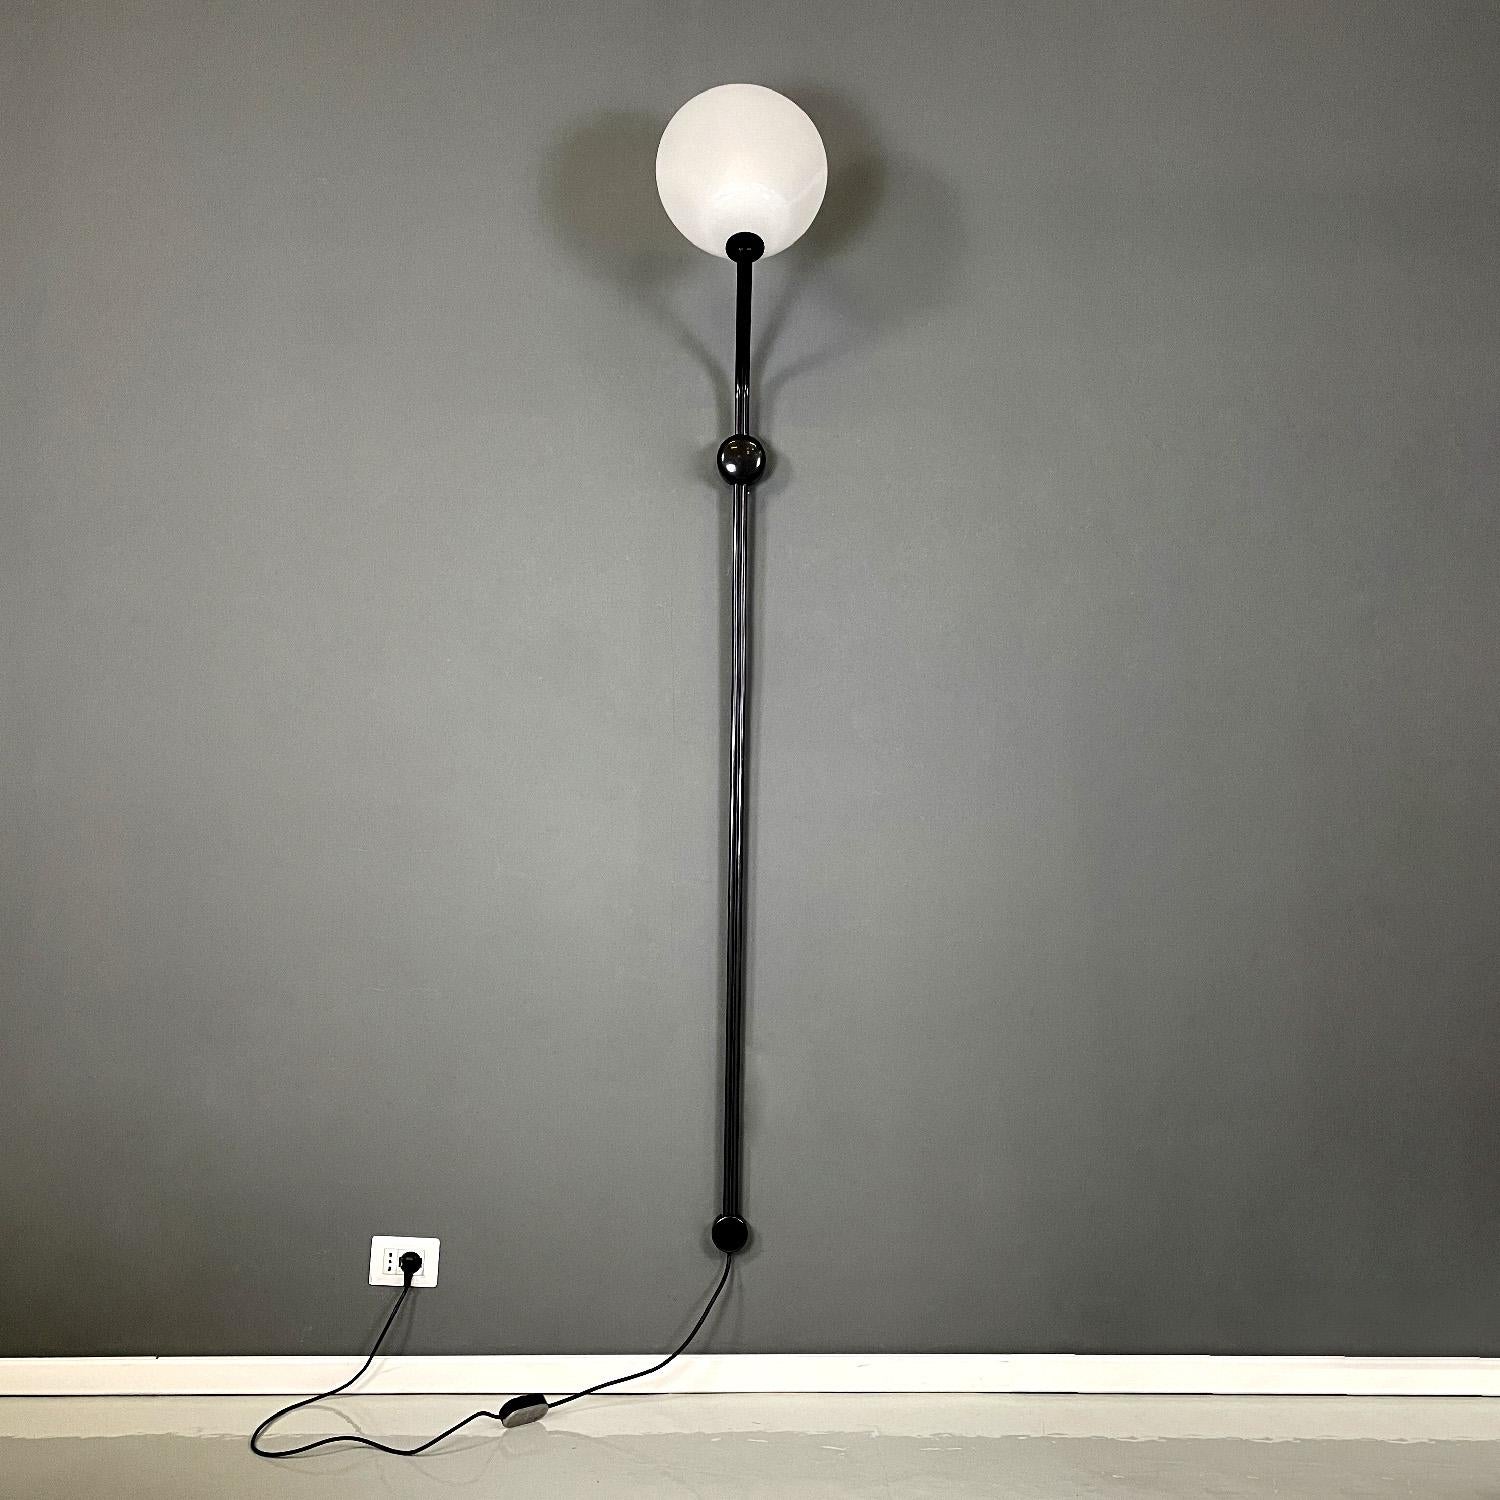 Italian modern applique Parter by Achille Castiglioni for Flos, 1970s
Wall sconce mod. Parter. The structure is in gunmetal gray painted metal with a glossy finish and is composed of a central stem with two round components: one at the base and one